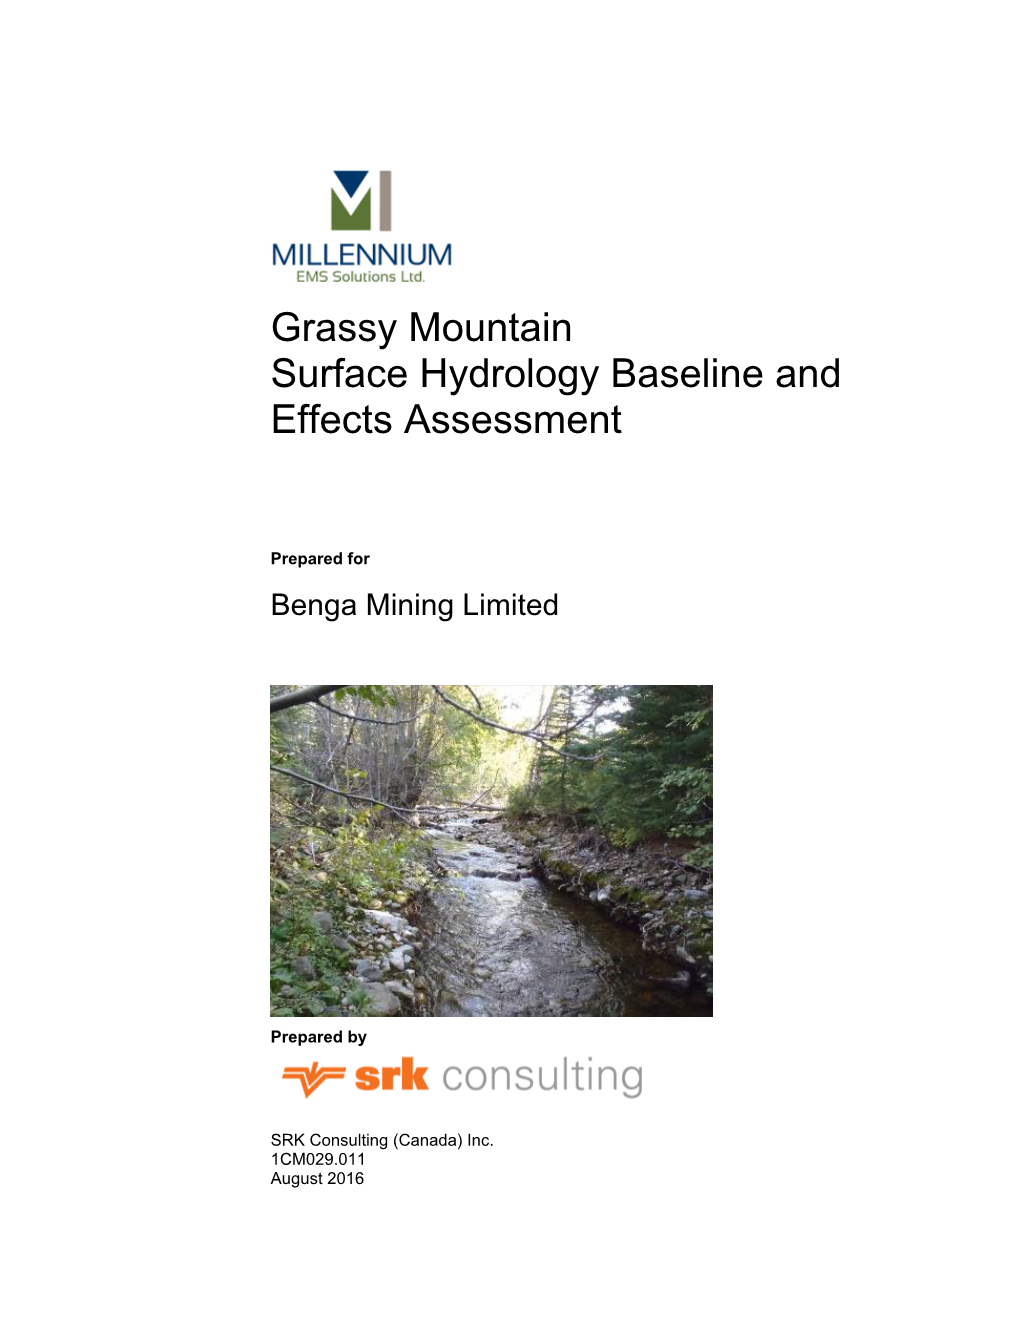 Grassy Mountain Surface Hydrology Baseline and Effects Assessment